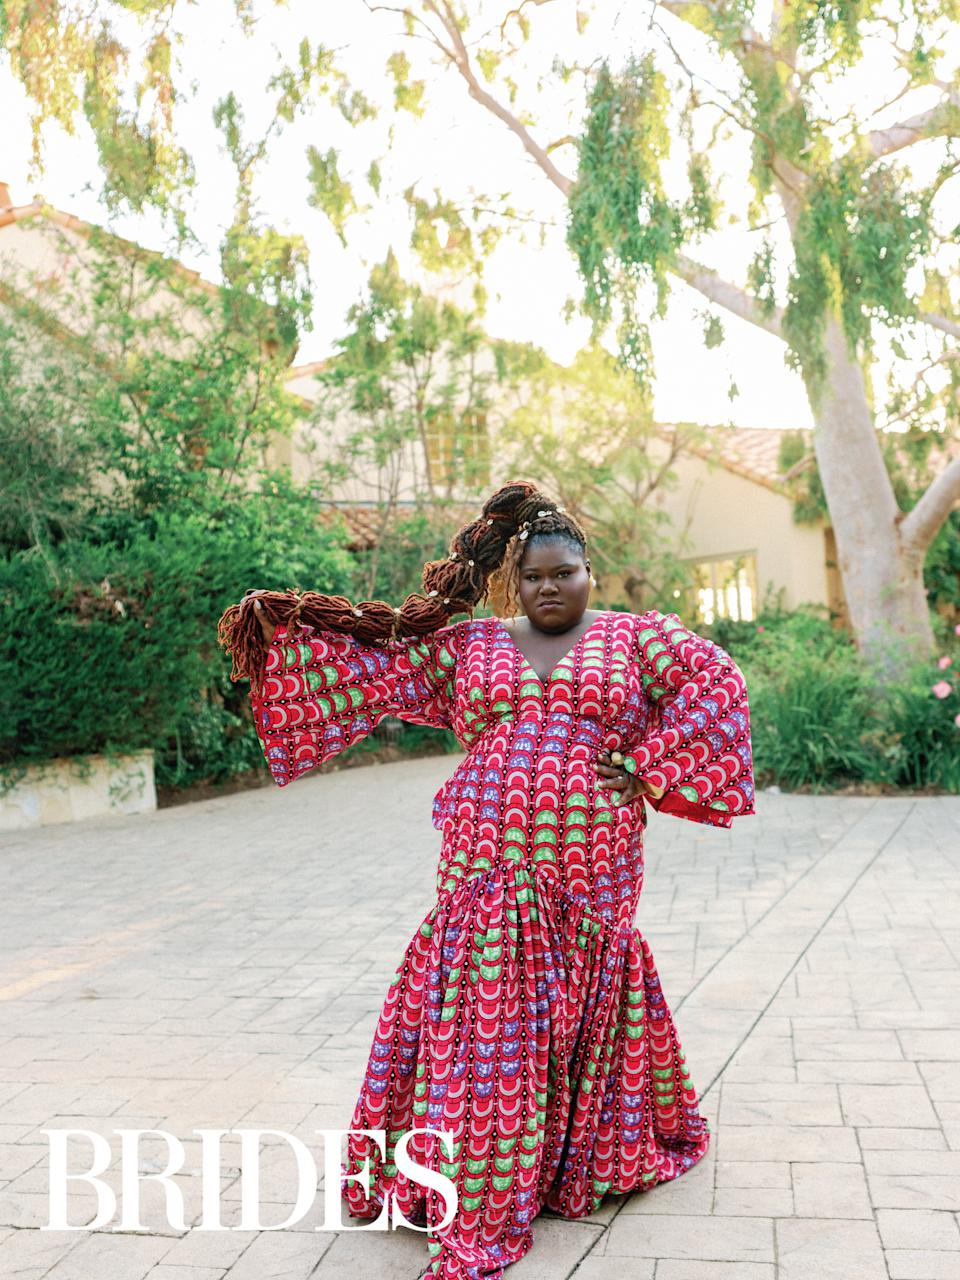 Gabourey Sidibe, 39, makes history with unconventional 'Brides' cover: 'I’m super against tradition'